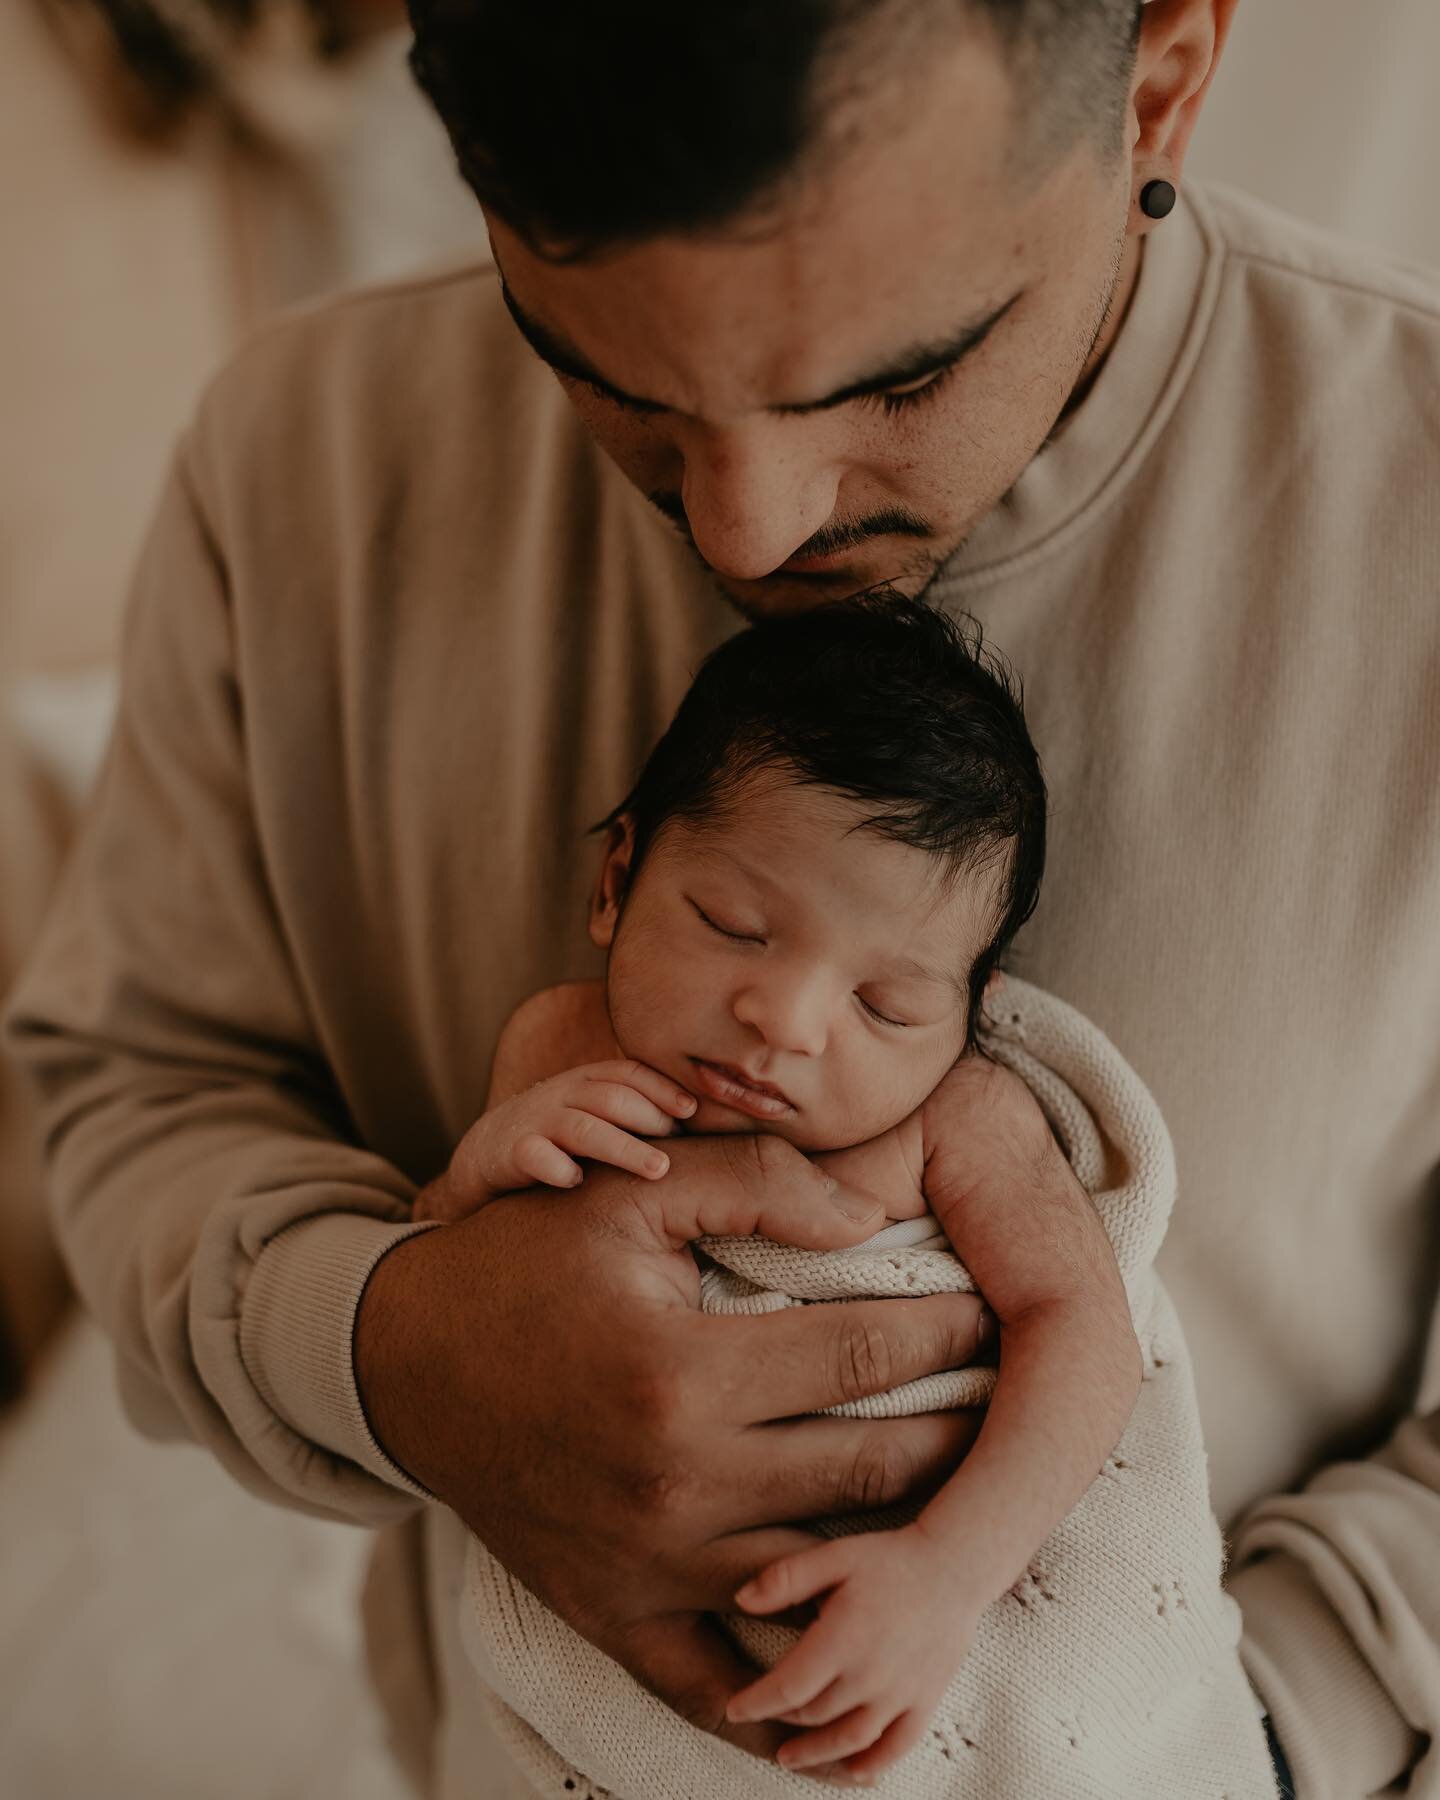 Fatherhood ✨

&ldquo;Dads are most ordinary men turned by love into heroes, adventurers, story-tellers, and singers of song.&rdquo; &ndash; Pam Brown
.
.
#father #fatherhood #fathers #fatherlove #familyphotography #familyphotographer #familyphotograp